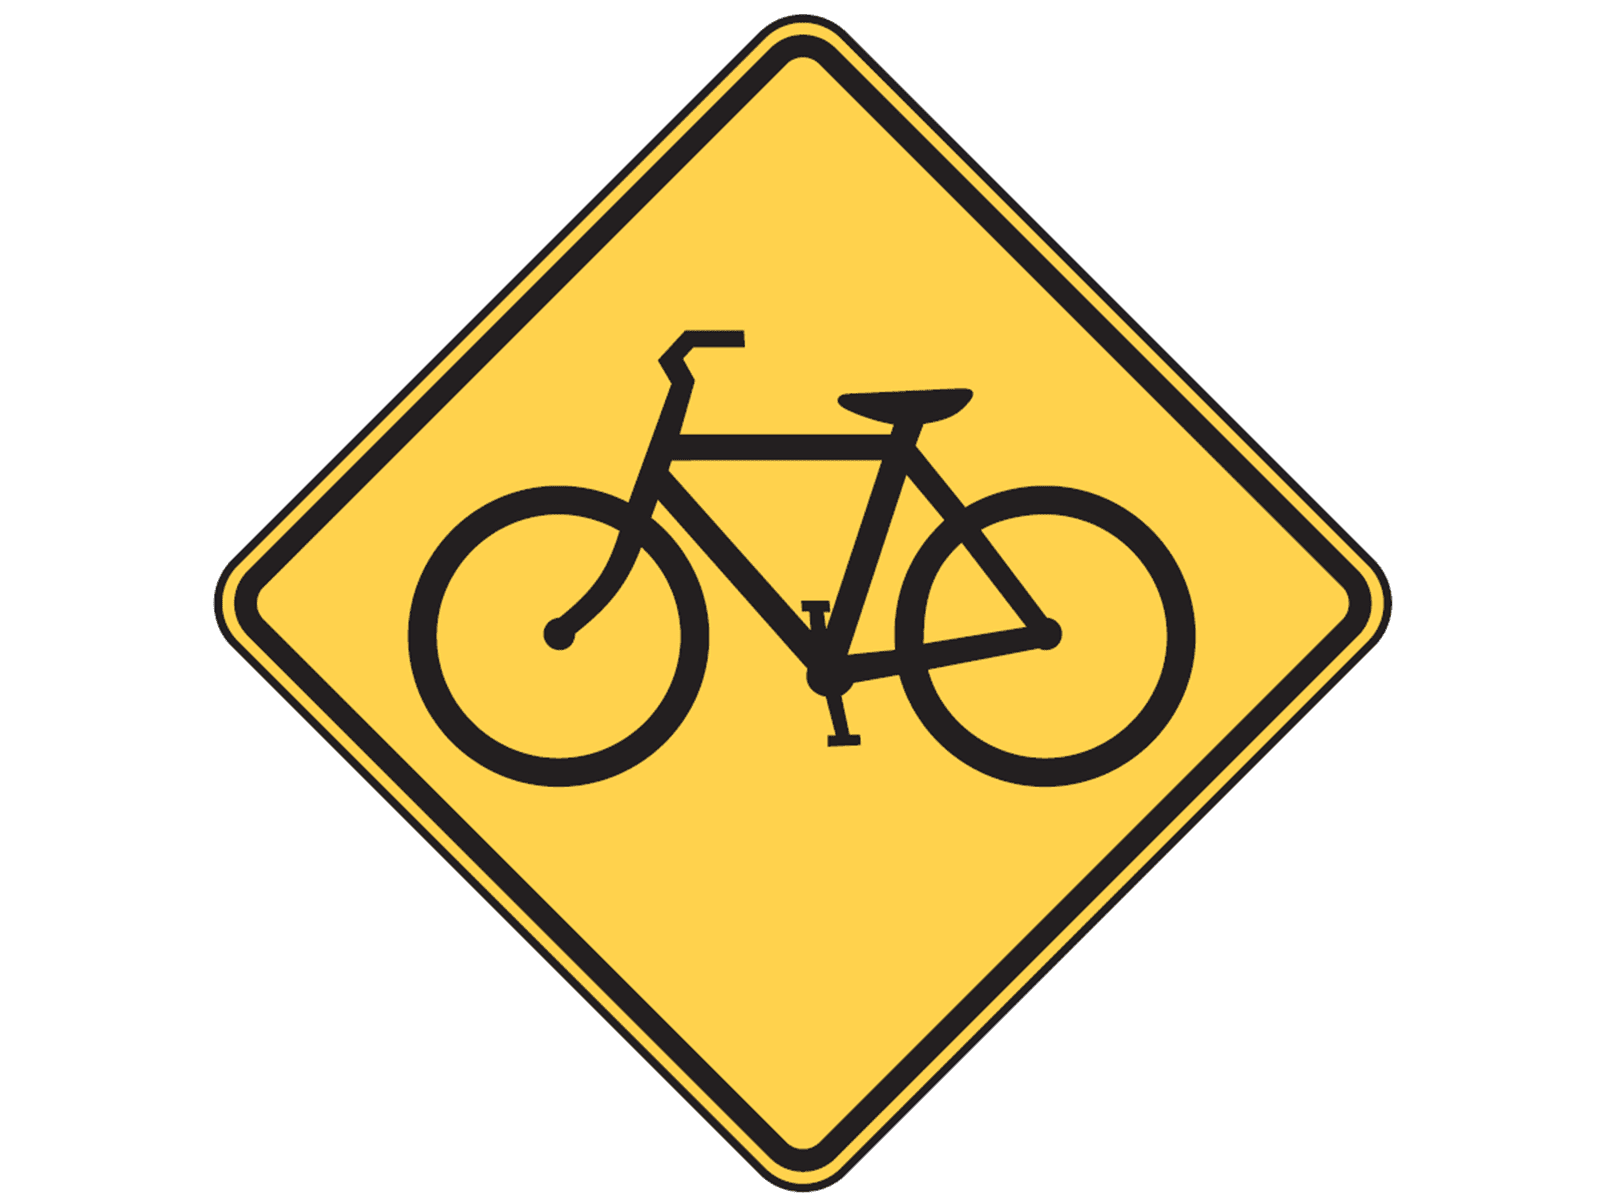 Bicycle Crossing W11-1 - W11: Bicycles